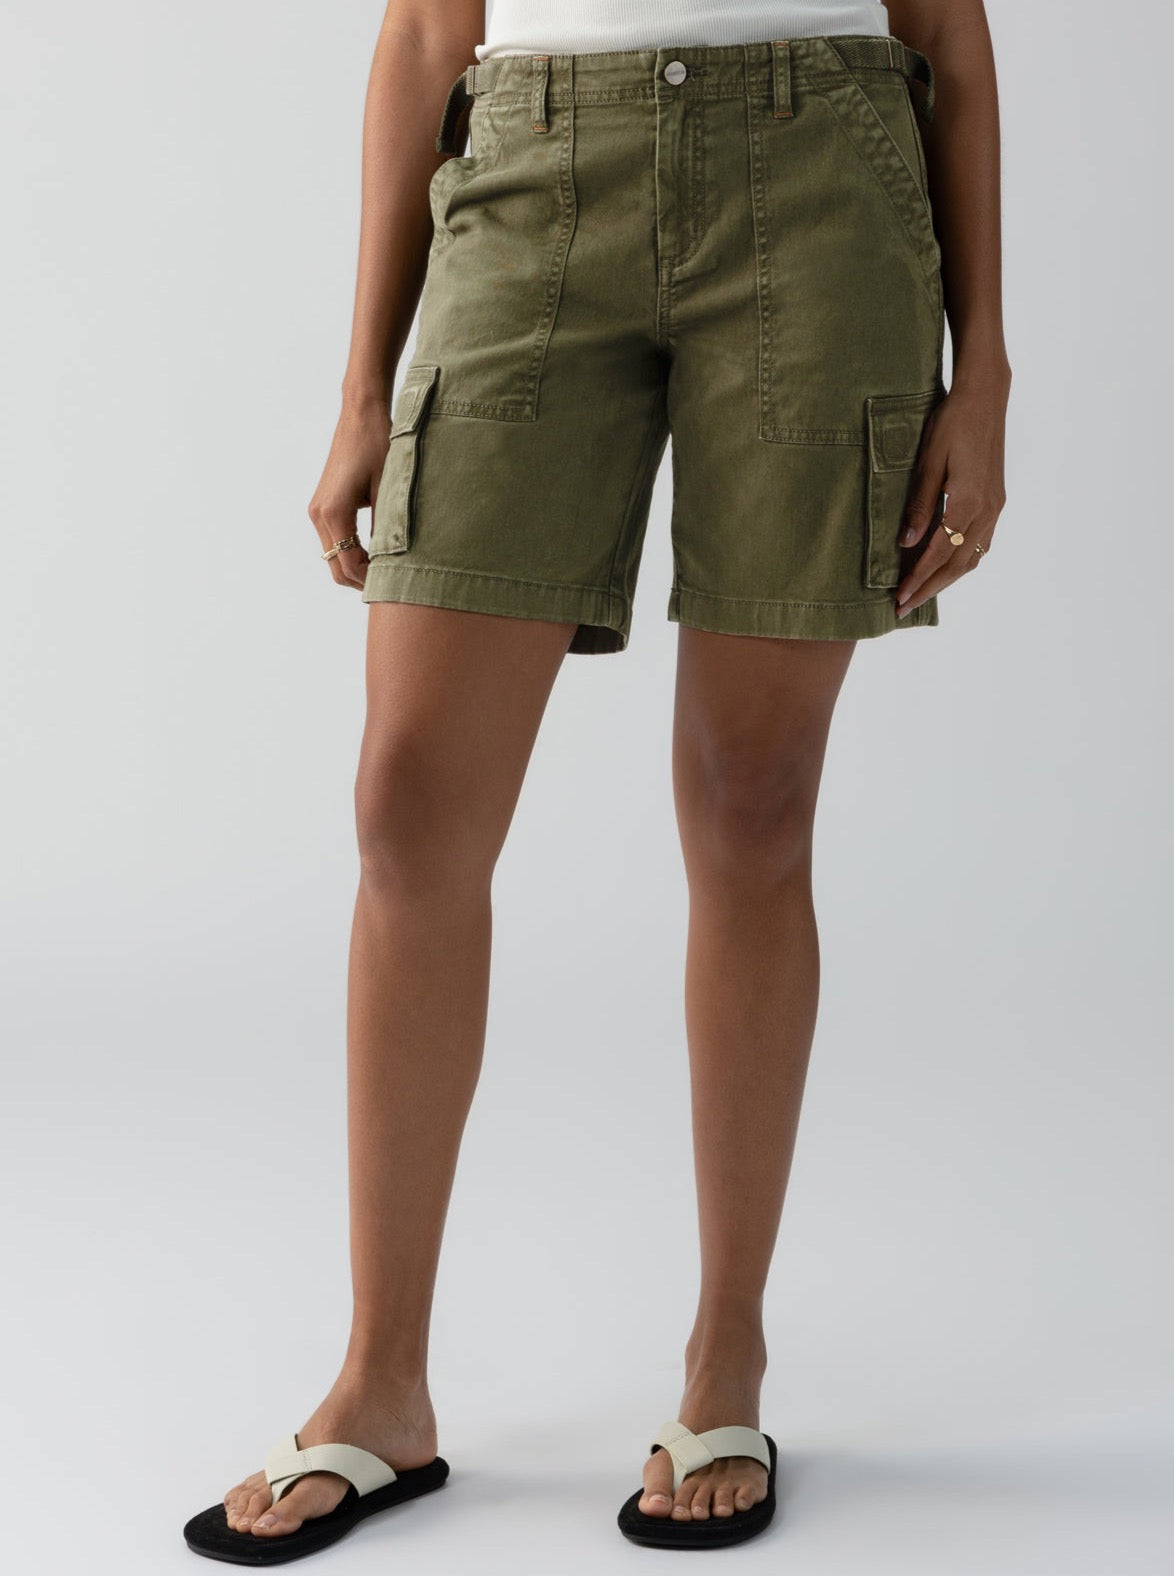 Sanctuary Reissue Shorts in Mossy Green